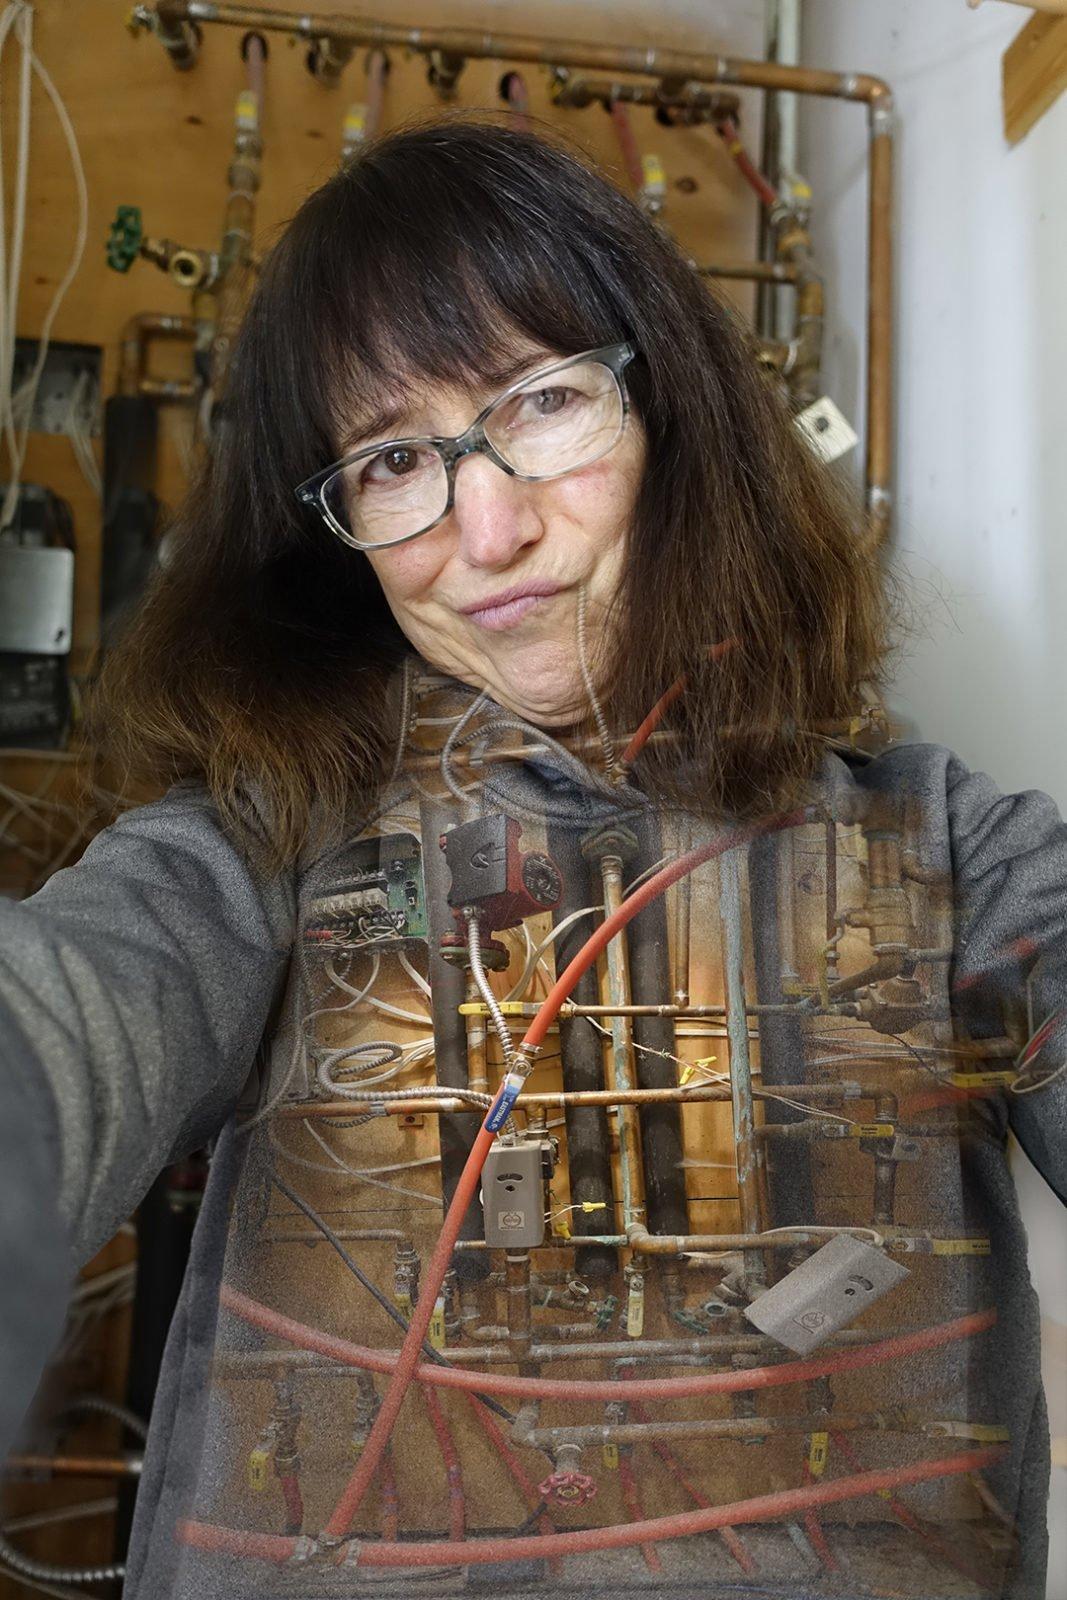 Robin Botie of Ithaca, New York photoshops her old heating system as she puts in new heat pumps and hopes to live to be 100.